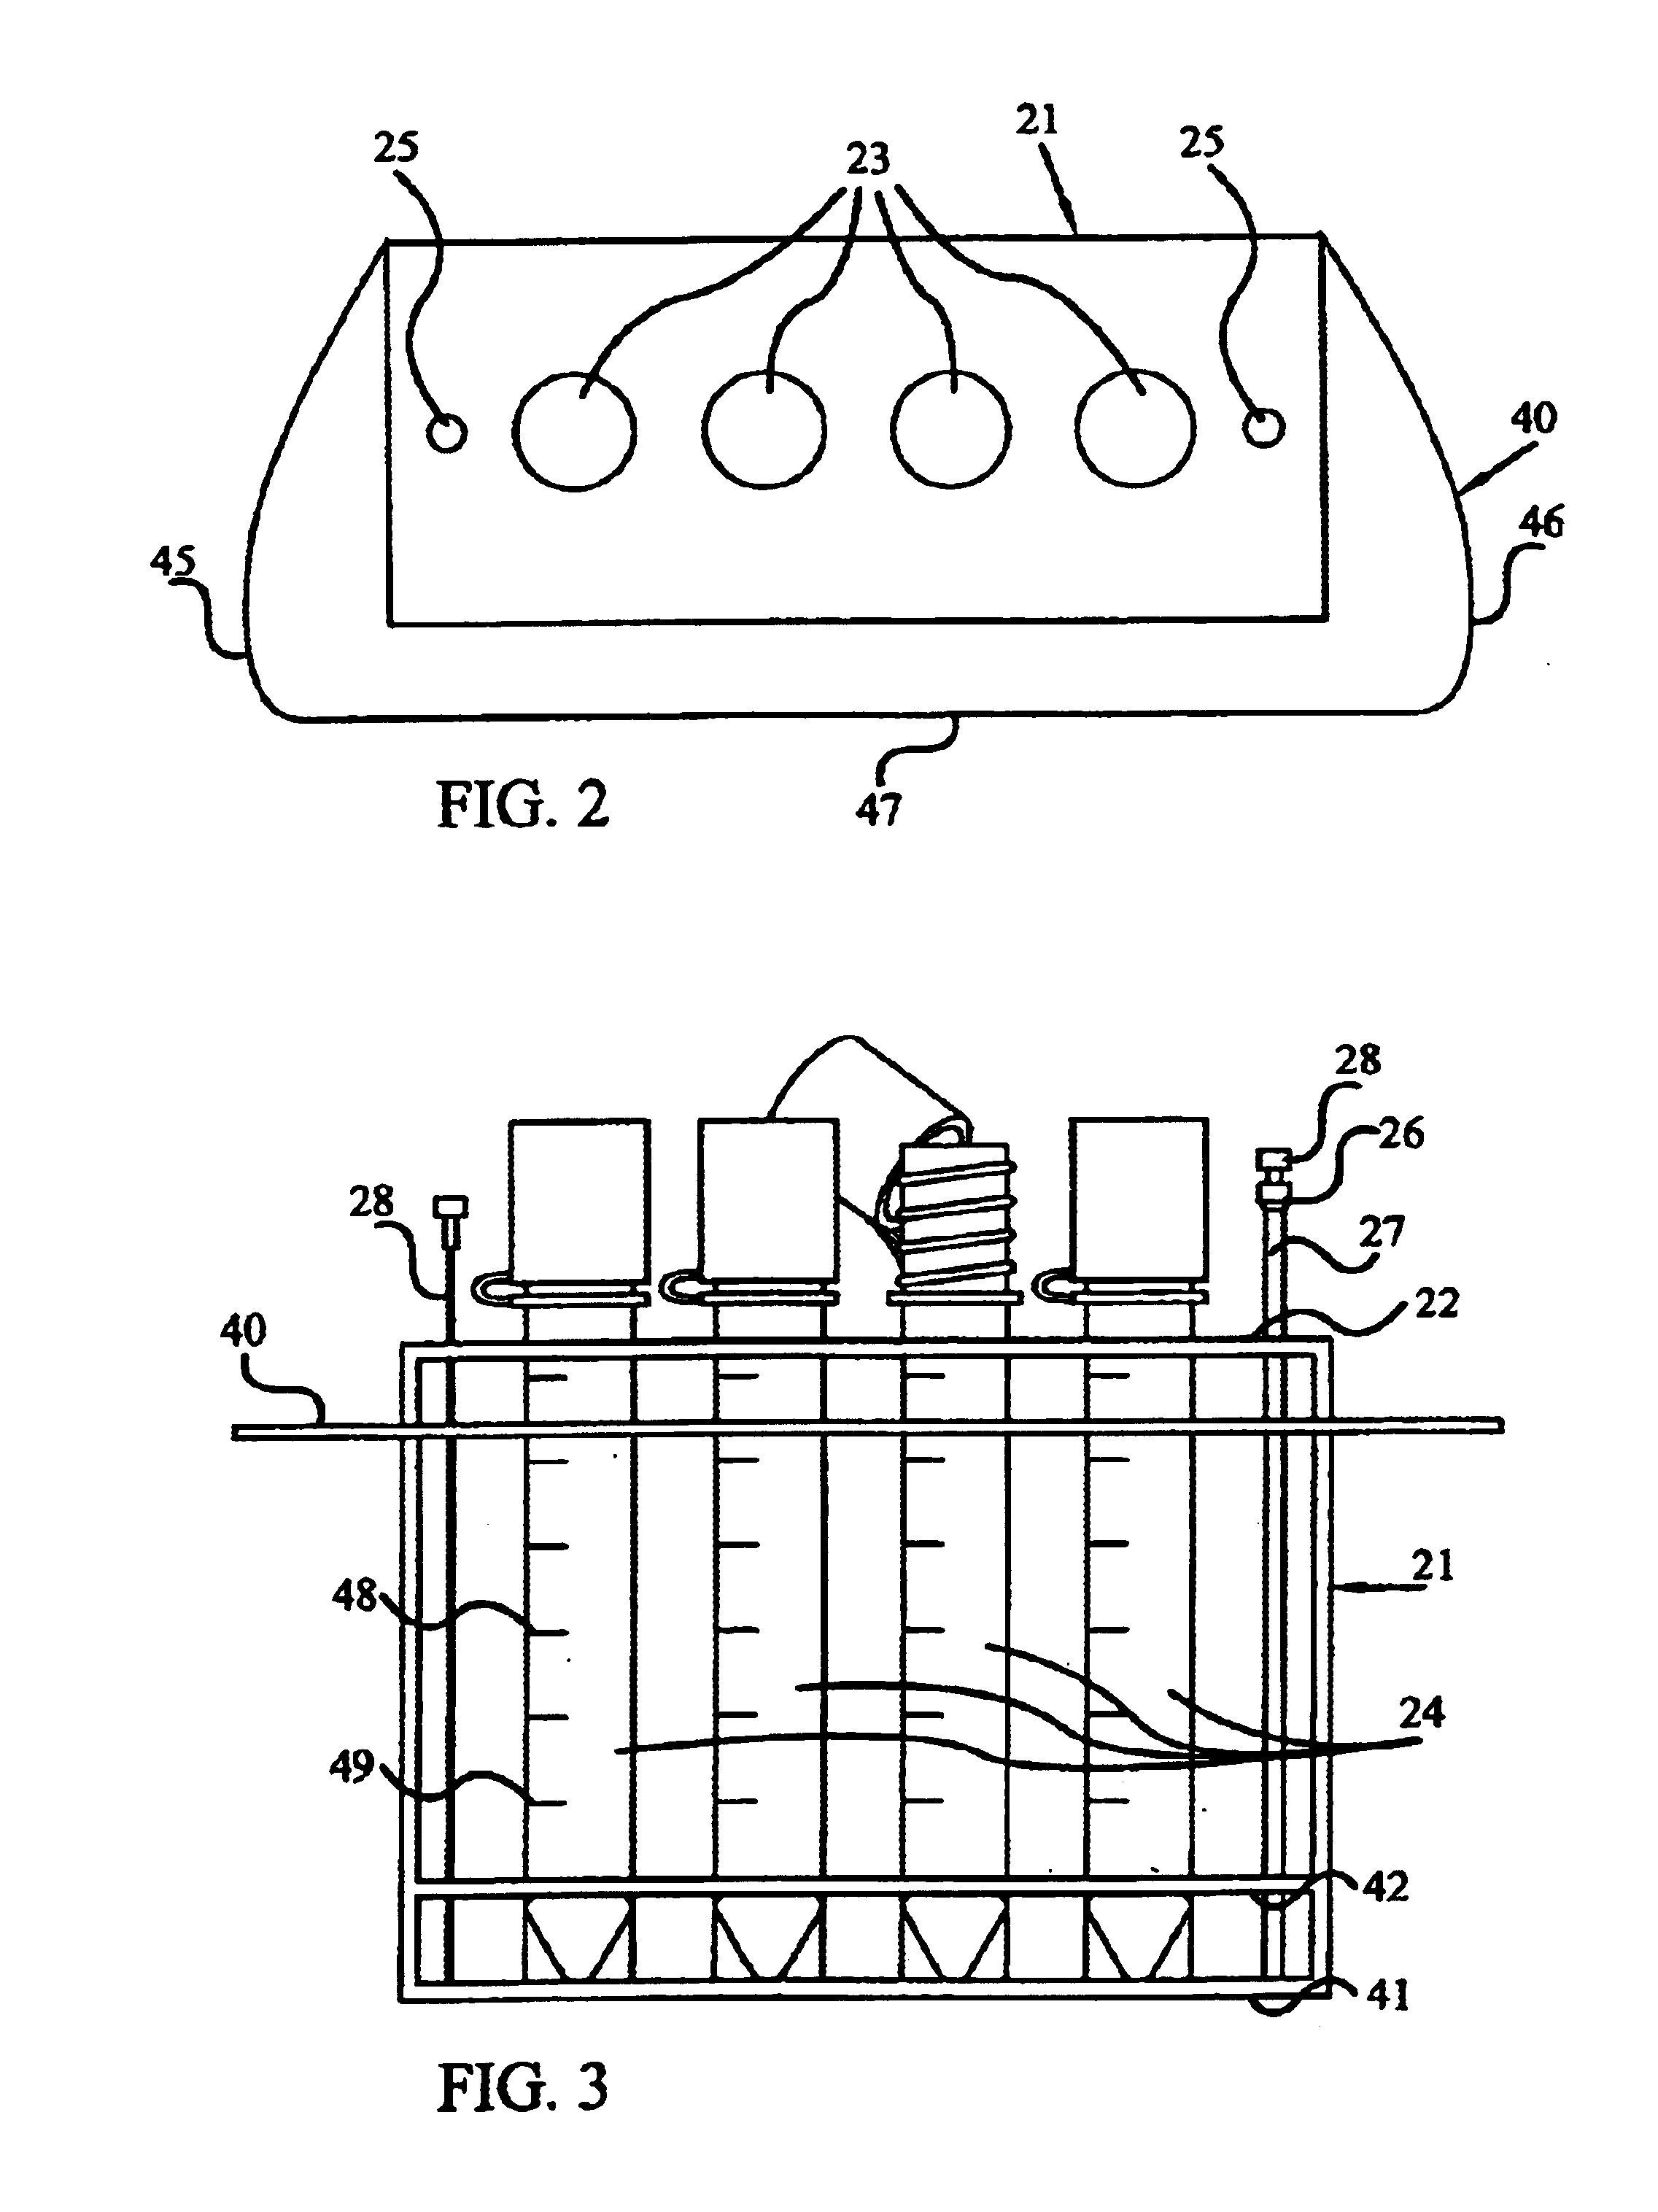 Spinal fluid collection system